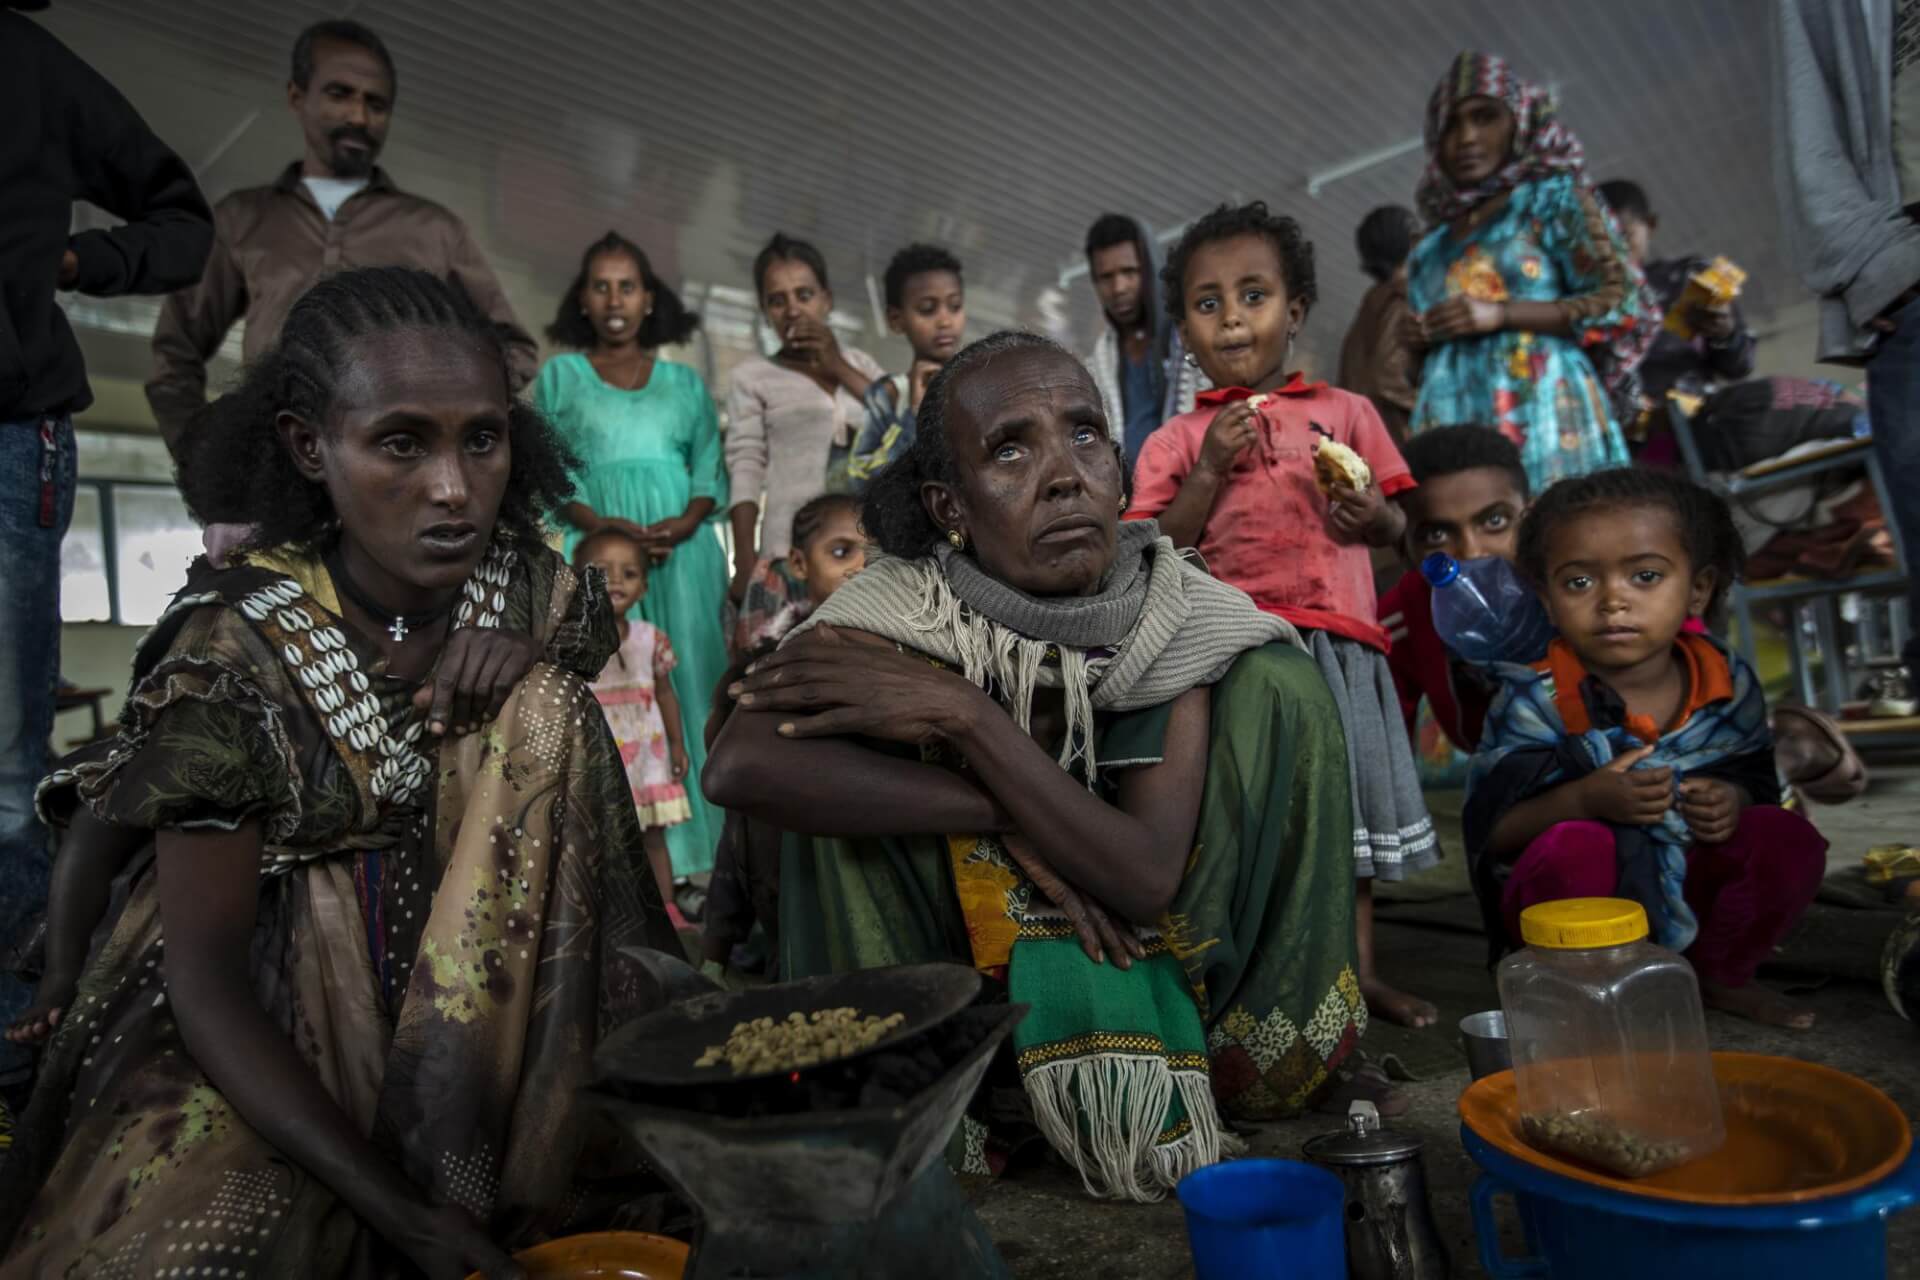 Does International Aid Lead to Dependency? The Case of Ethiopia